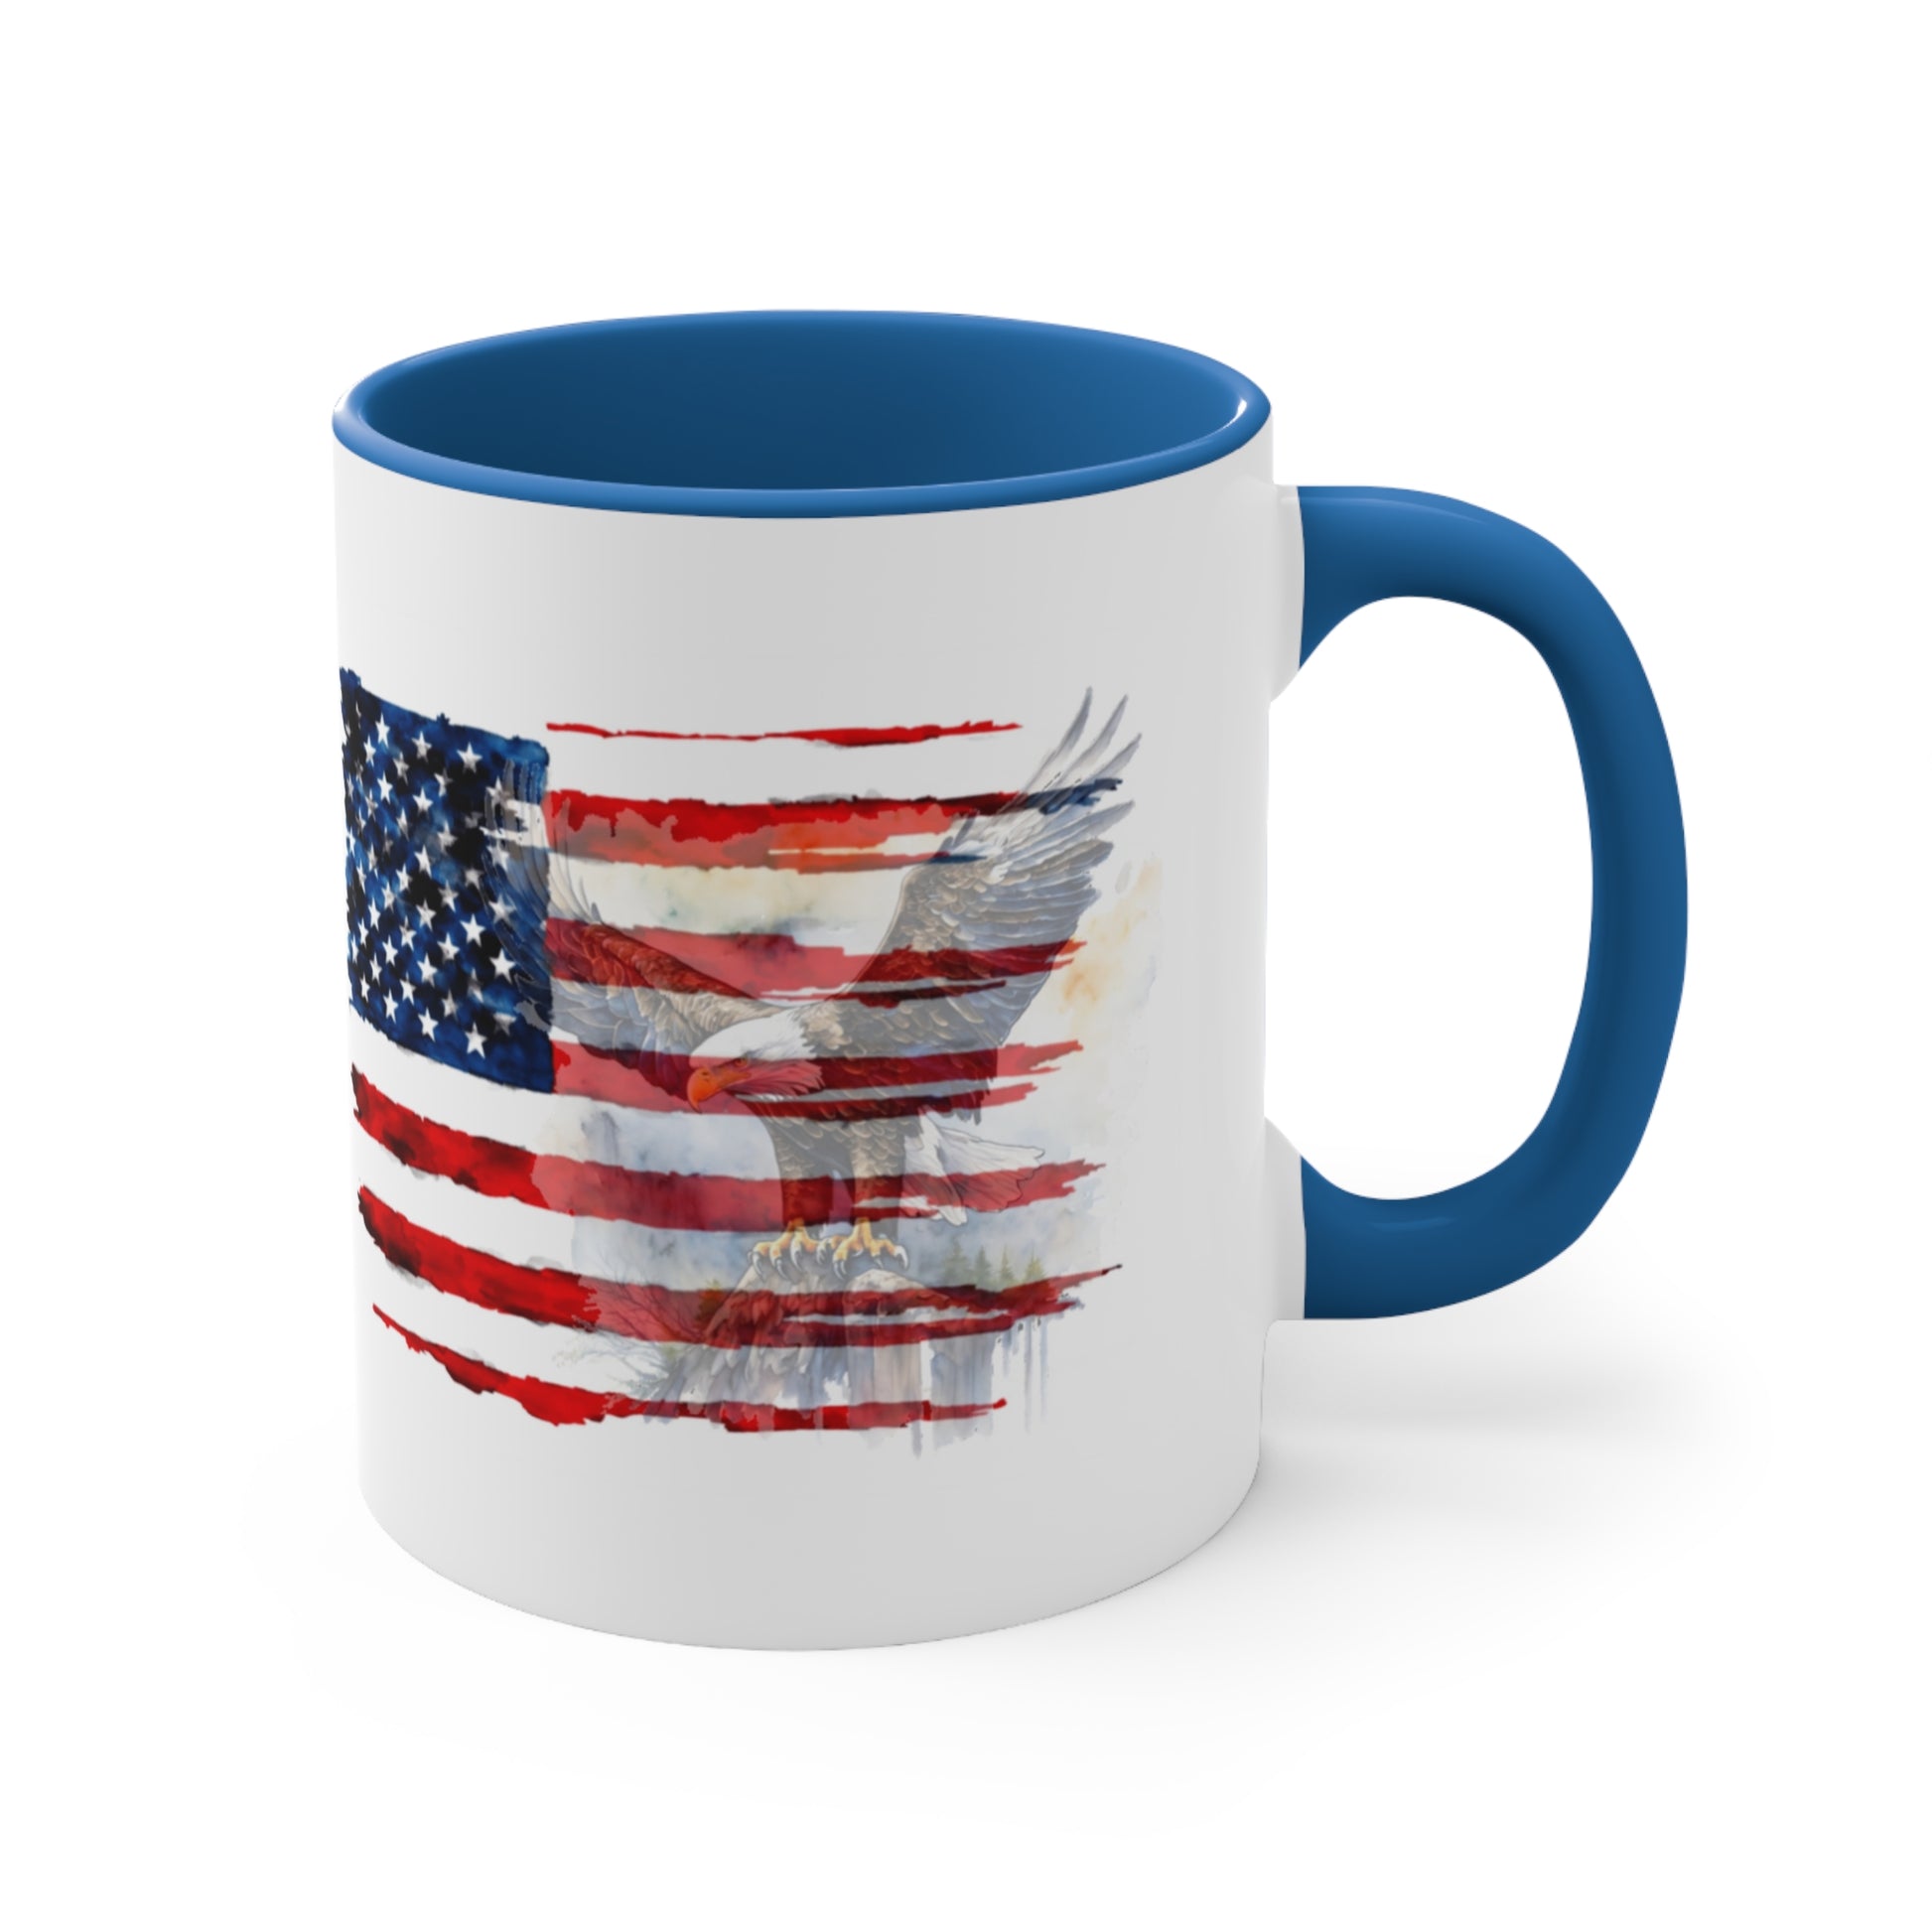 Coffee Mug with US Flag and eagle 11 oz, front view in blue.